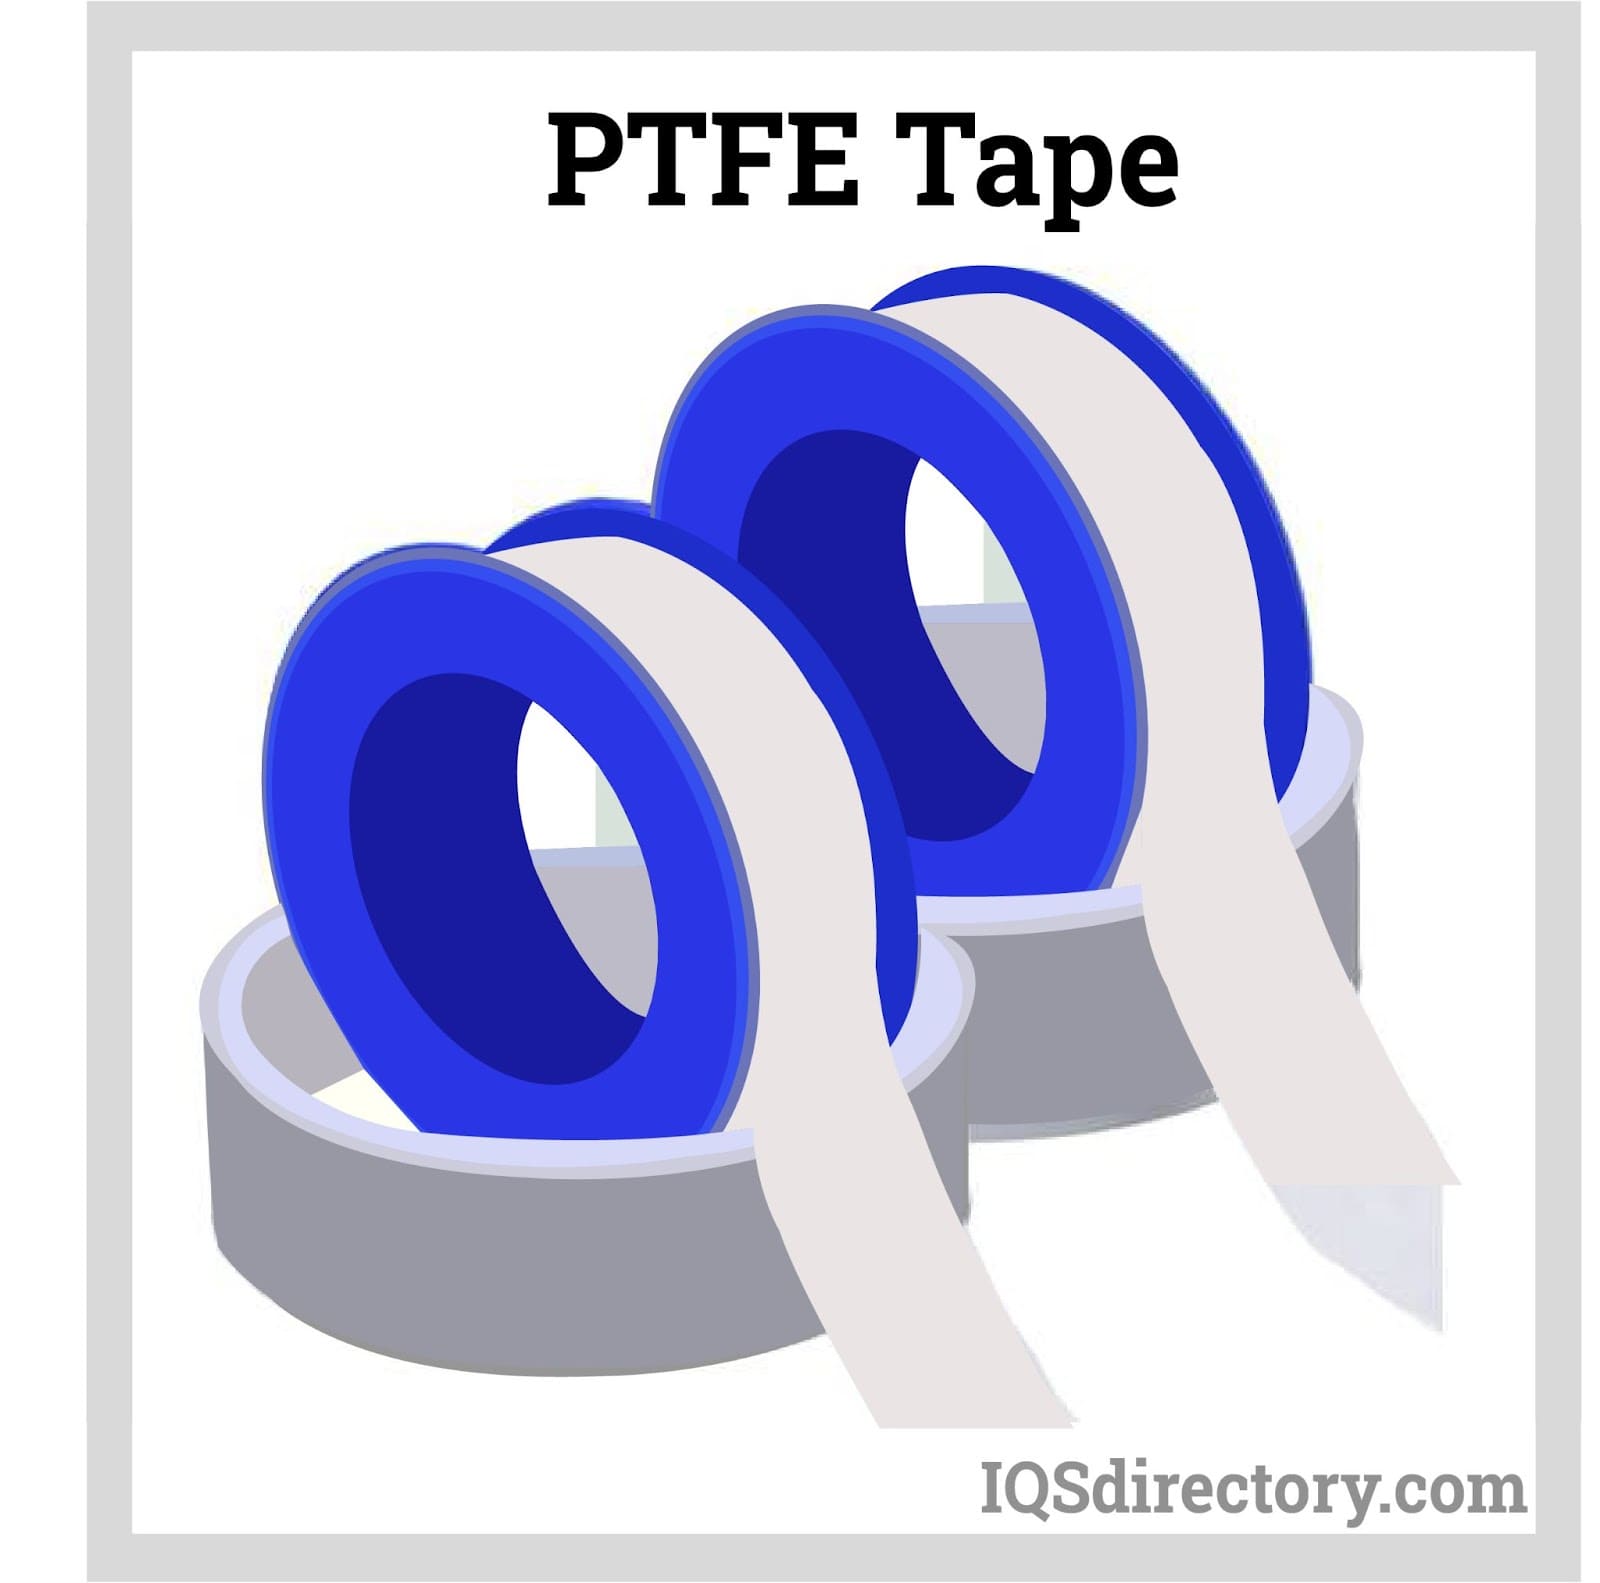 Masking Tape: Types, Applications, Advantages, and Colors